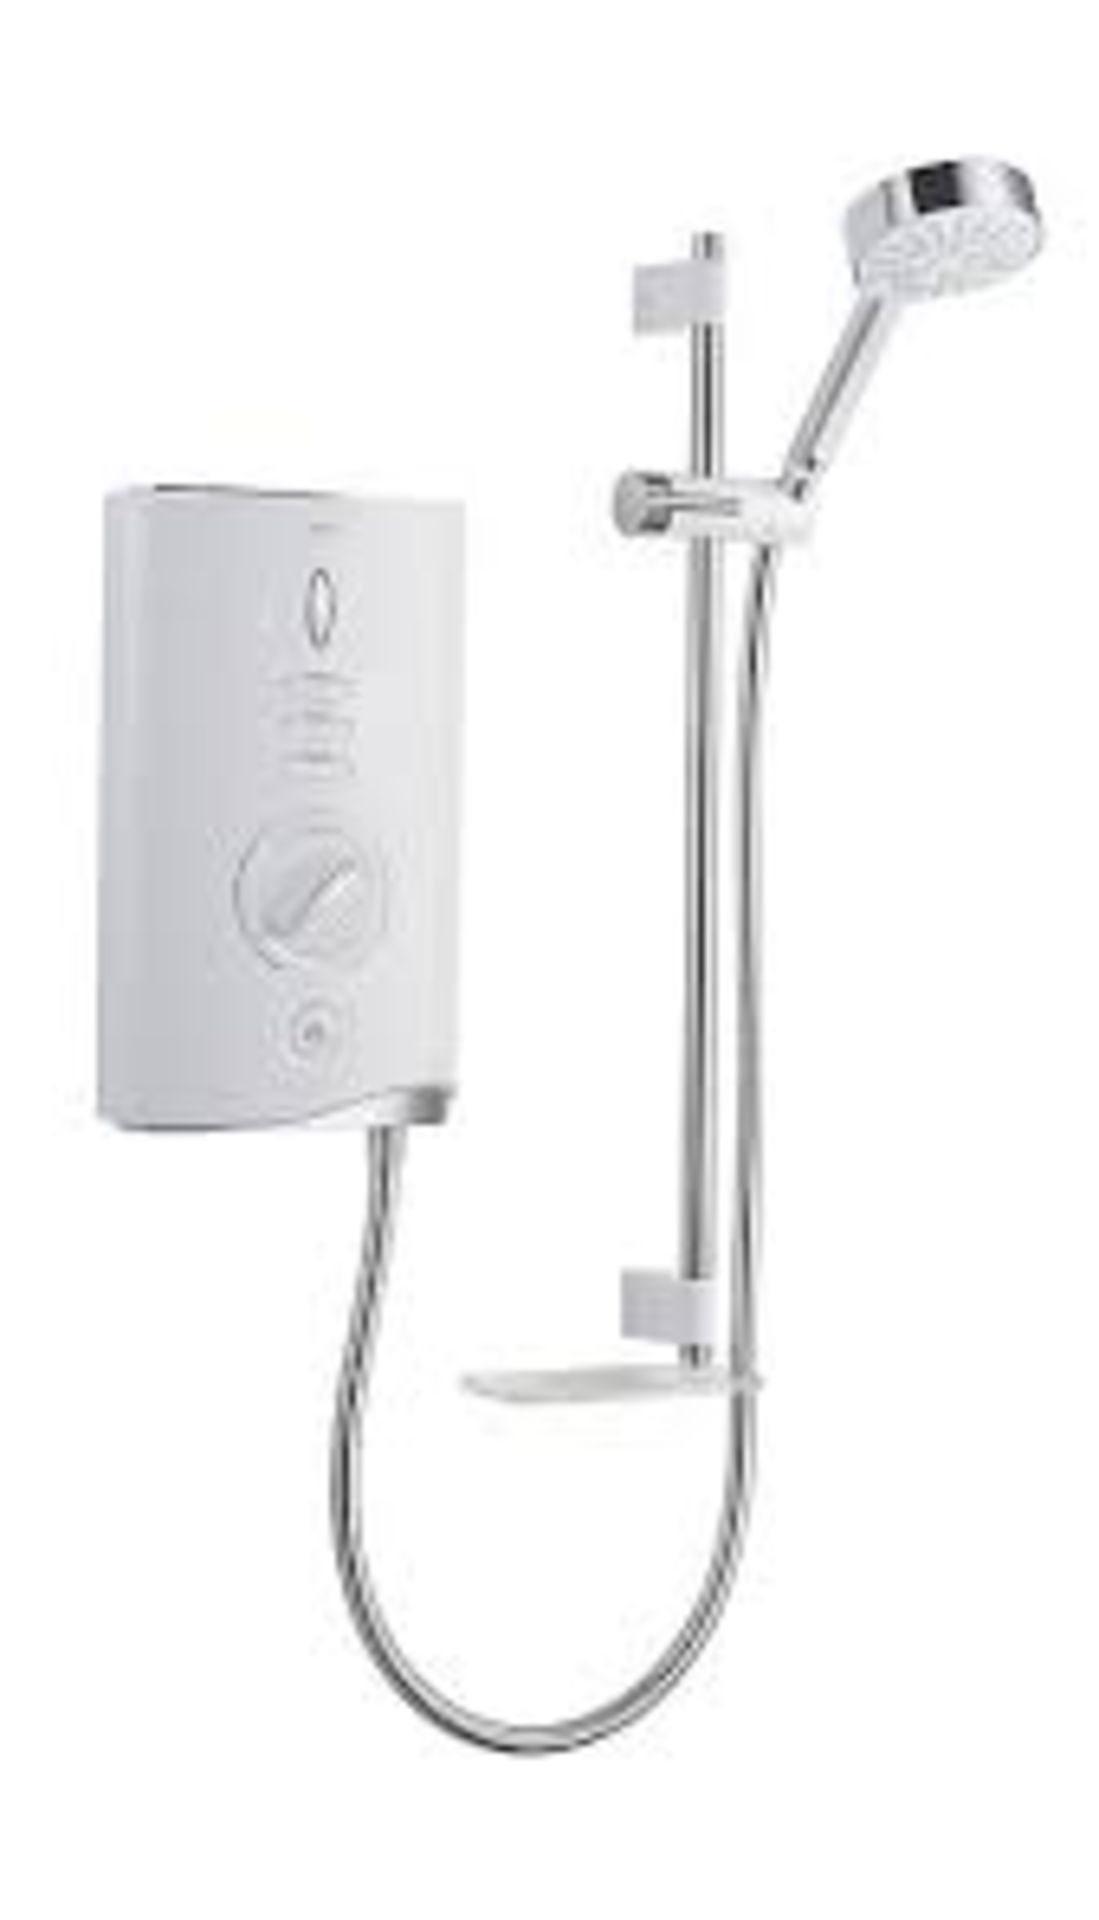 Mira Sport Max Airboost White Electric Shower, 9kW. - PW. Mira Sport Max Airboost white electric